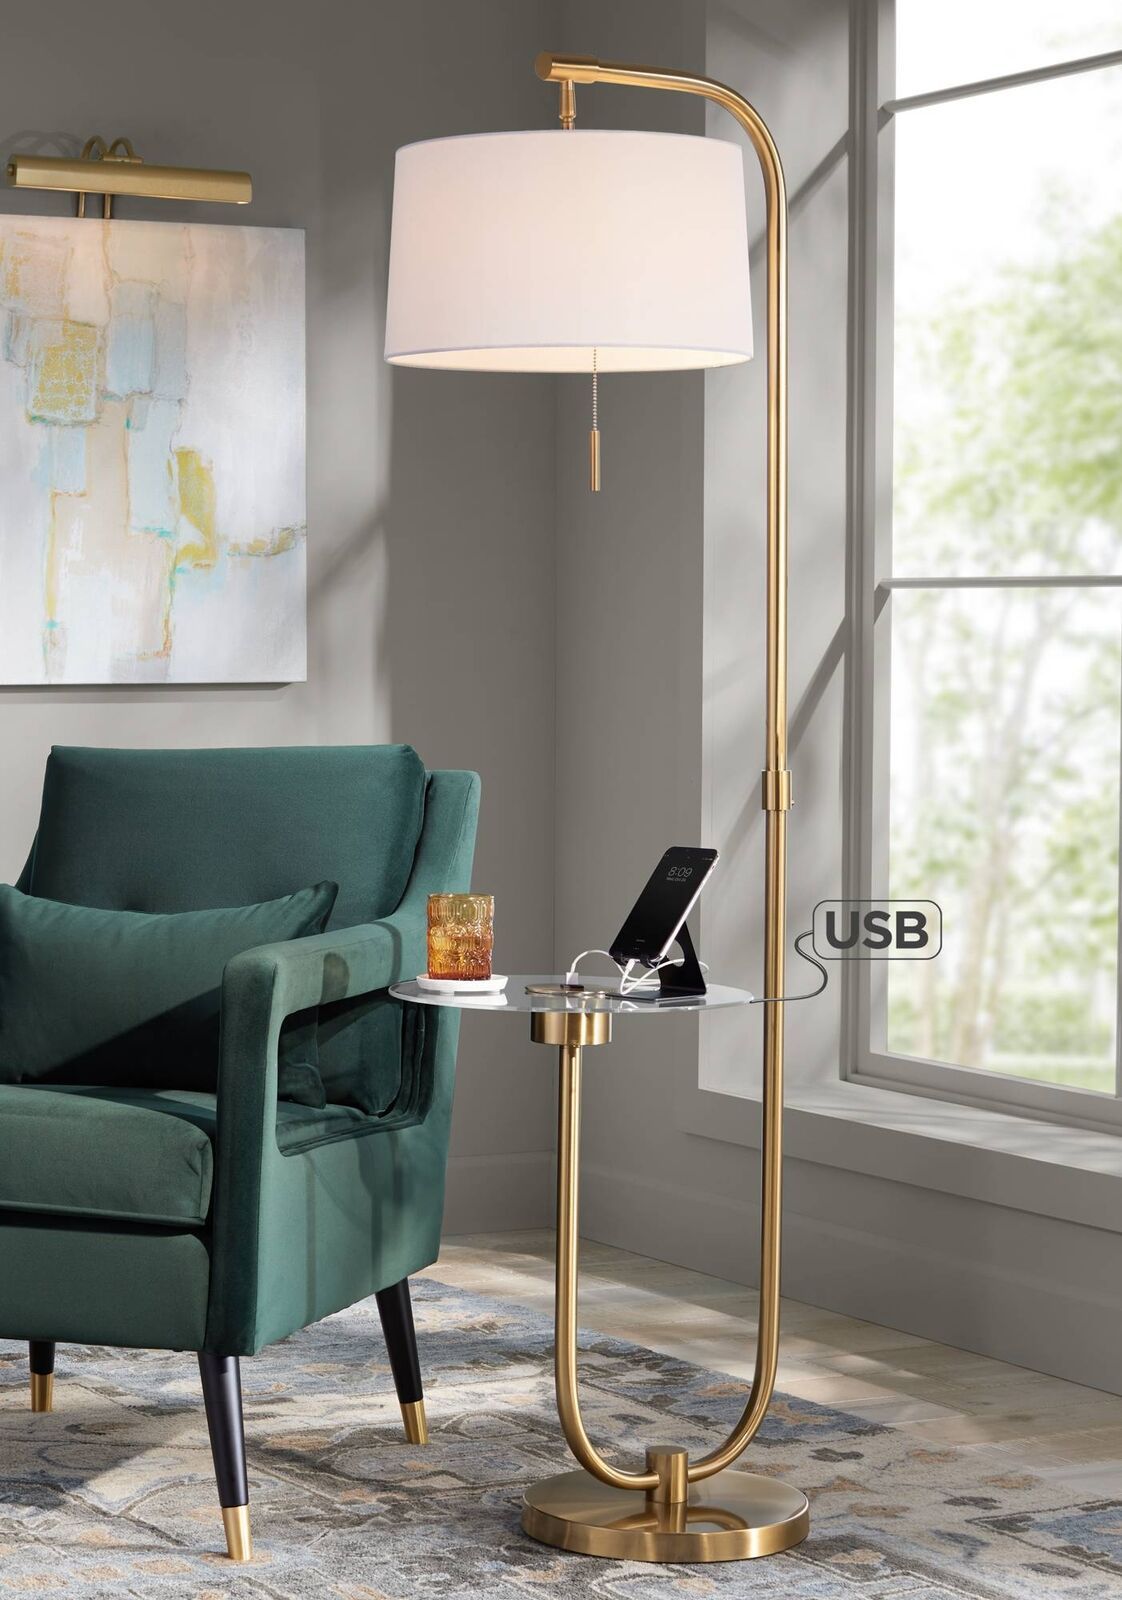 Modern Floor Lamp With Usb Port Tray Table Antique Brass White Shade Living  Room | Ebay With Regard To Floor Lamps With Usb (View 3 of 15)